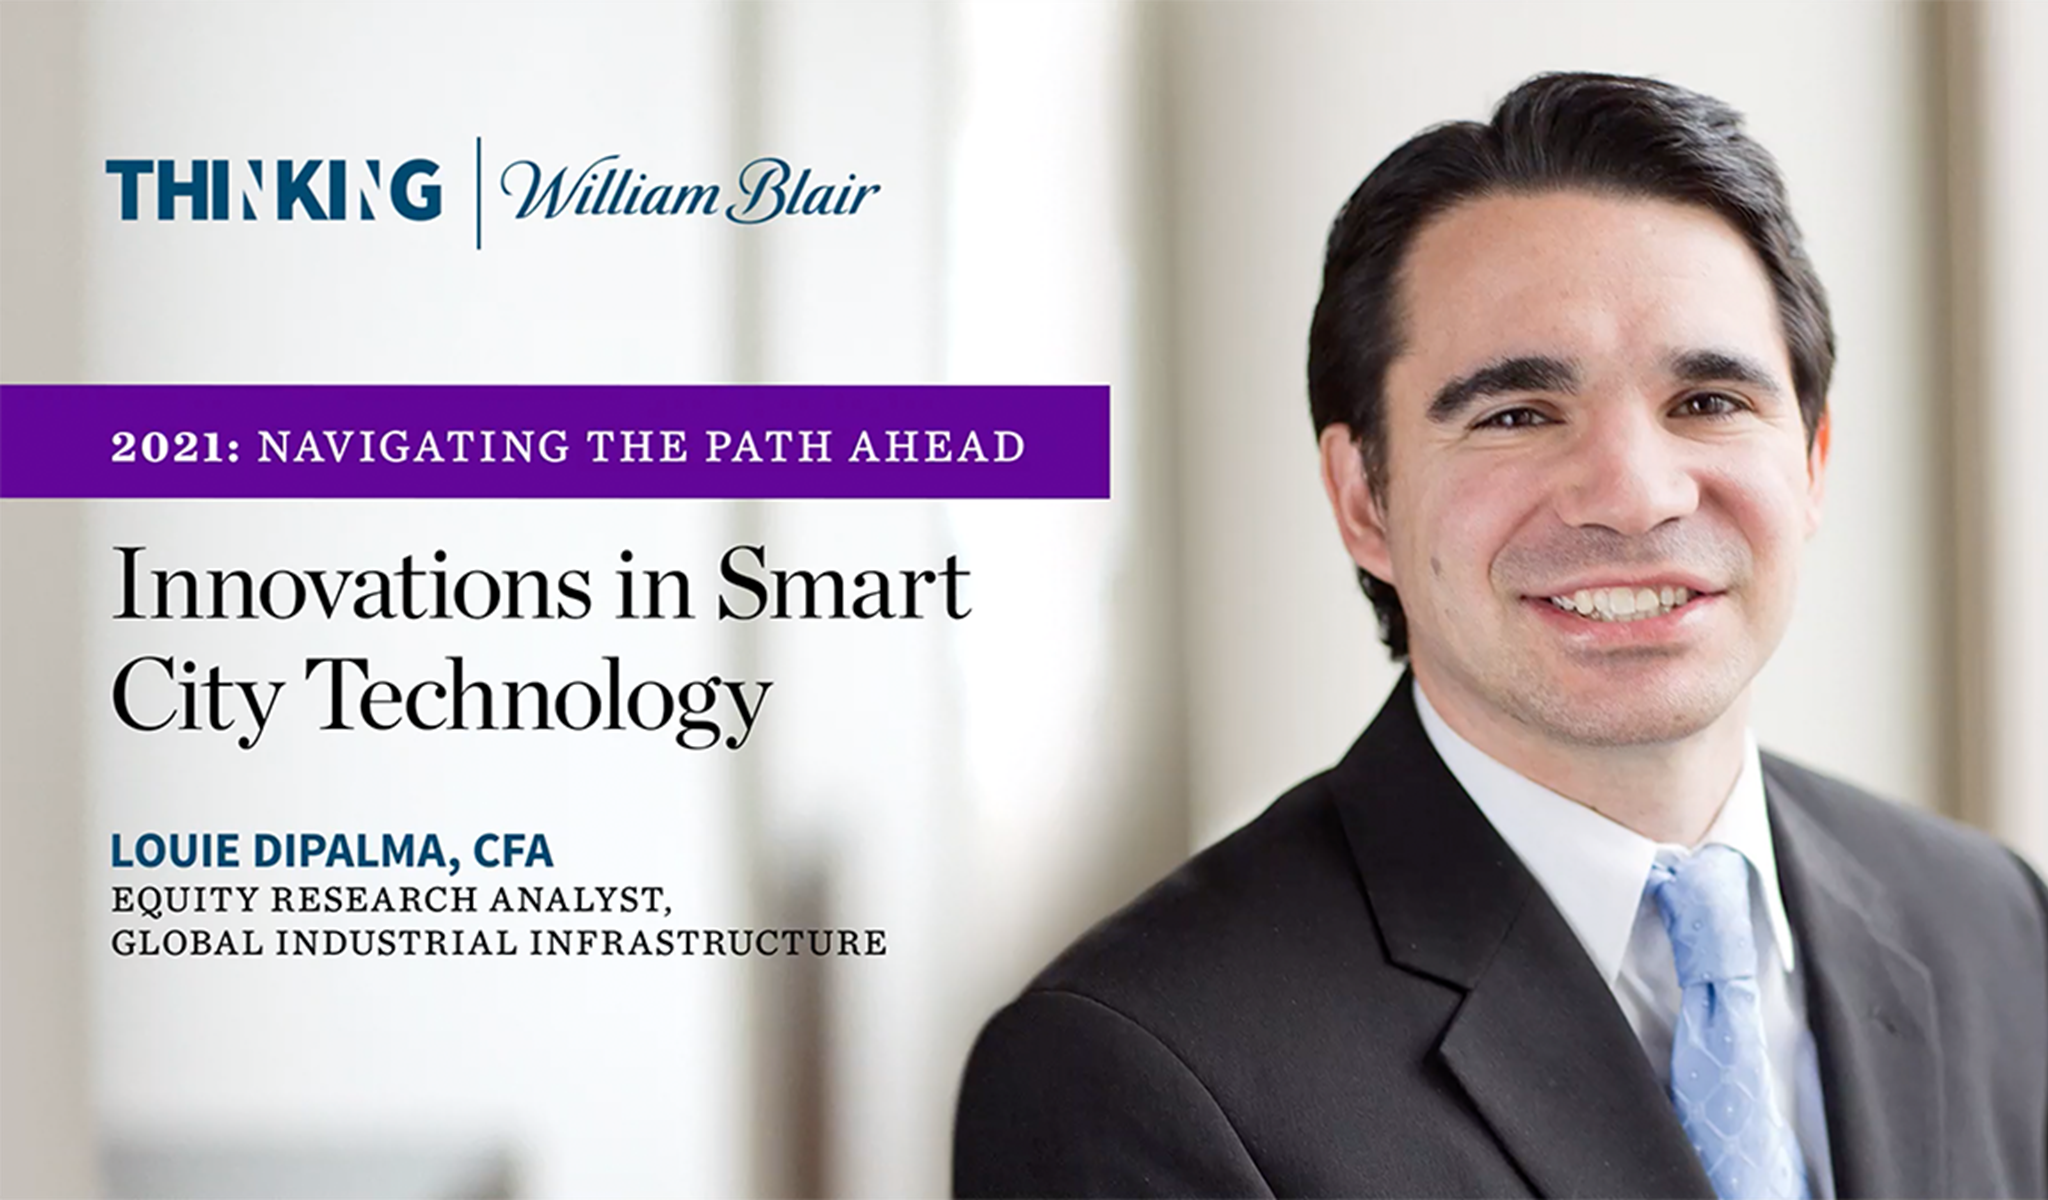 Louie DiPalma: Innovations in Smart City Technology